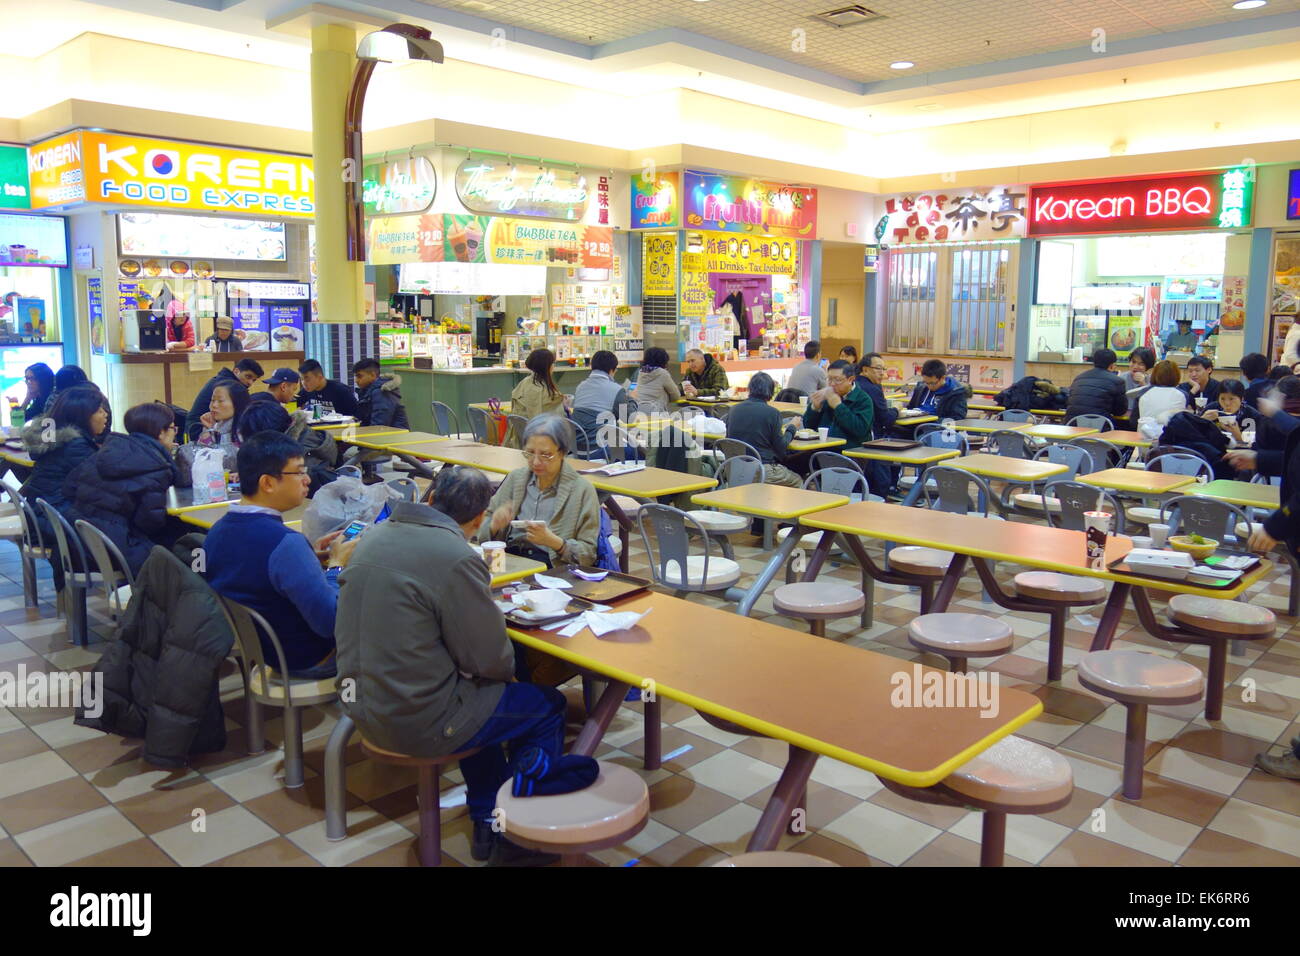 Food court at a Chinese mall in Toronto, Canada Stock Photo